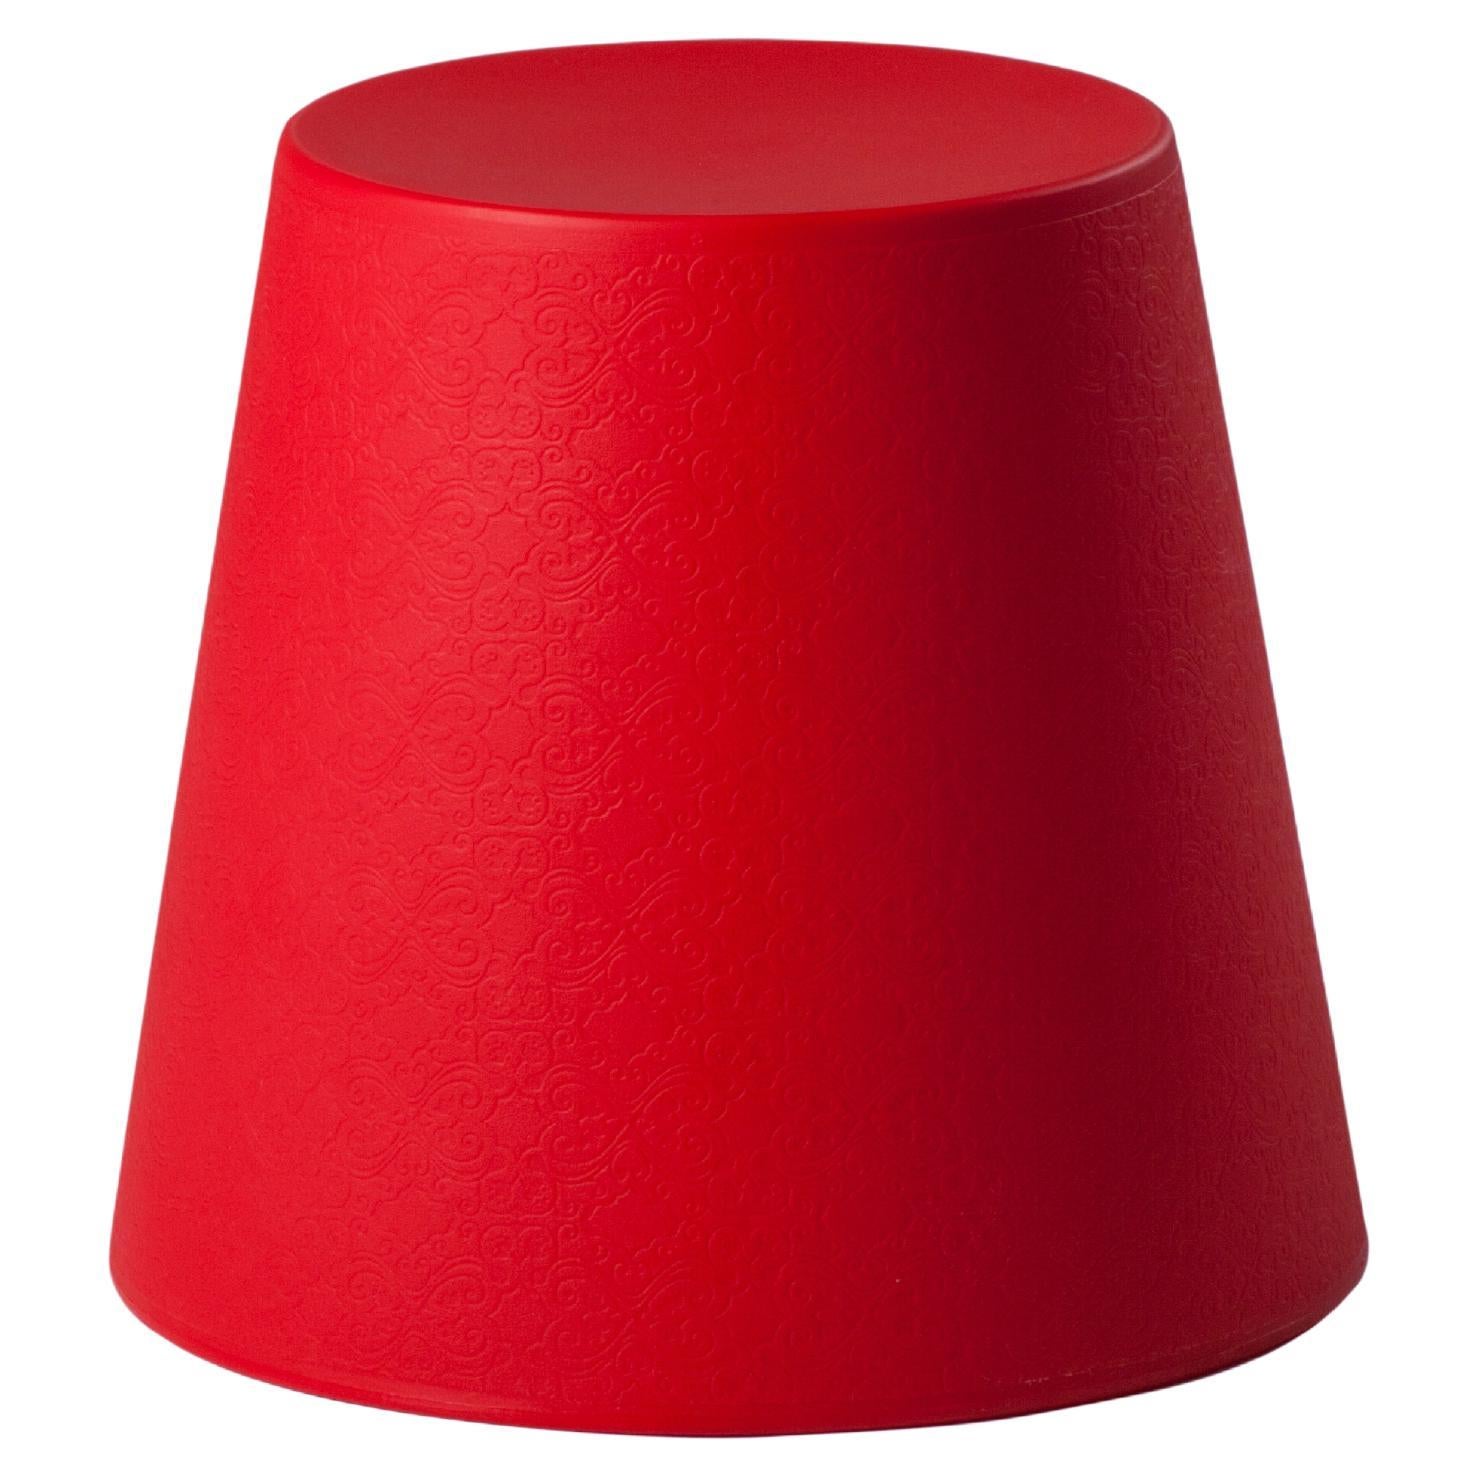 Slide Design Ali Baba Stool in Flame Red by Giò Colonna Romano For Sale